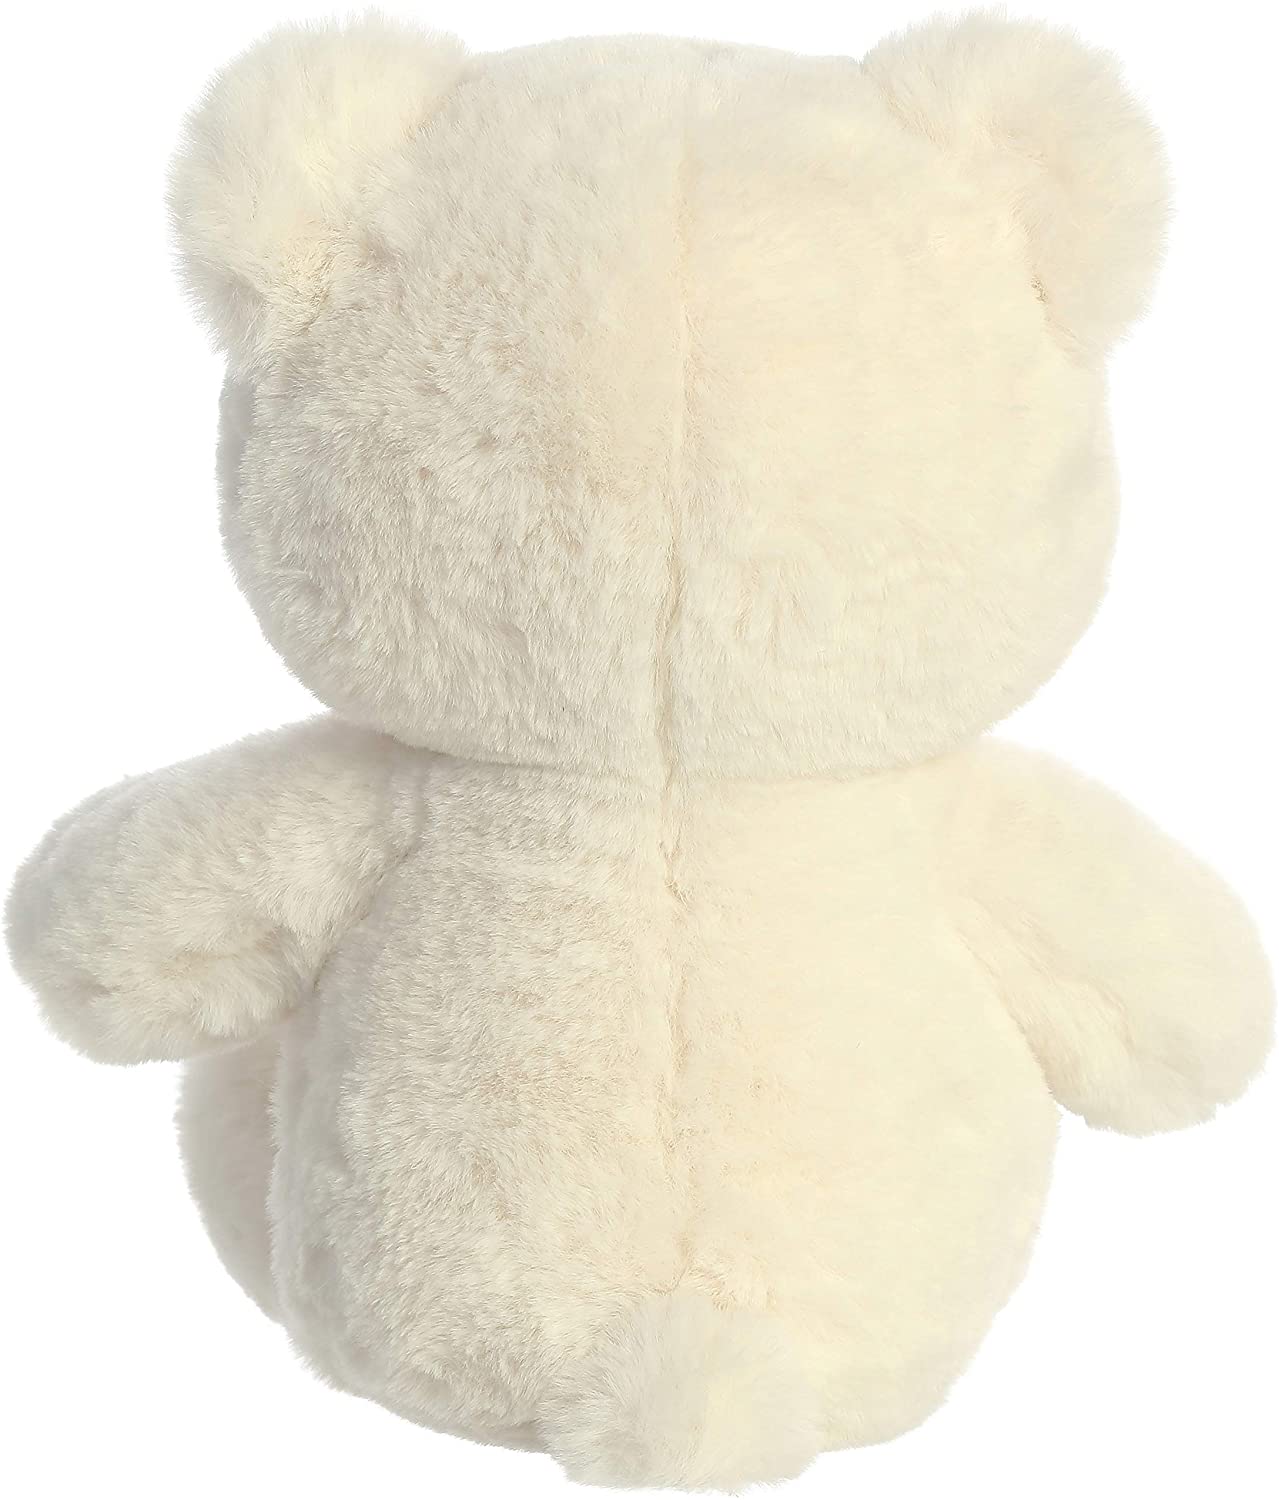 This adorable bear is going to become somebody's best friend! High quality materials make for a soft and fluffy touch Quality materials for a soft cuddling experience Cute face that will steal your heart Size: 13.5 inches high Cream colour